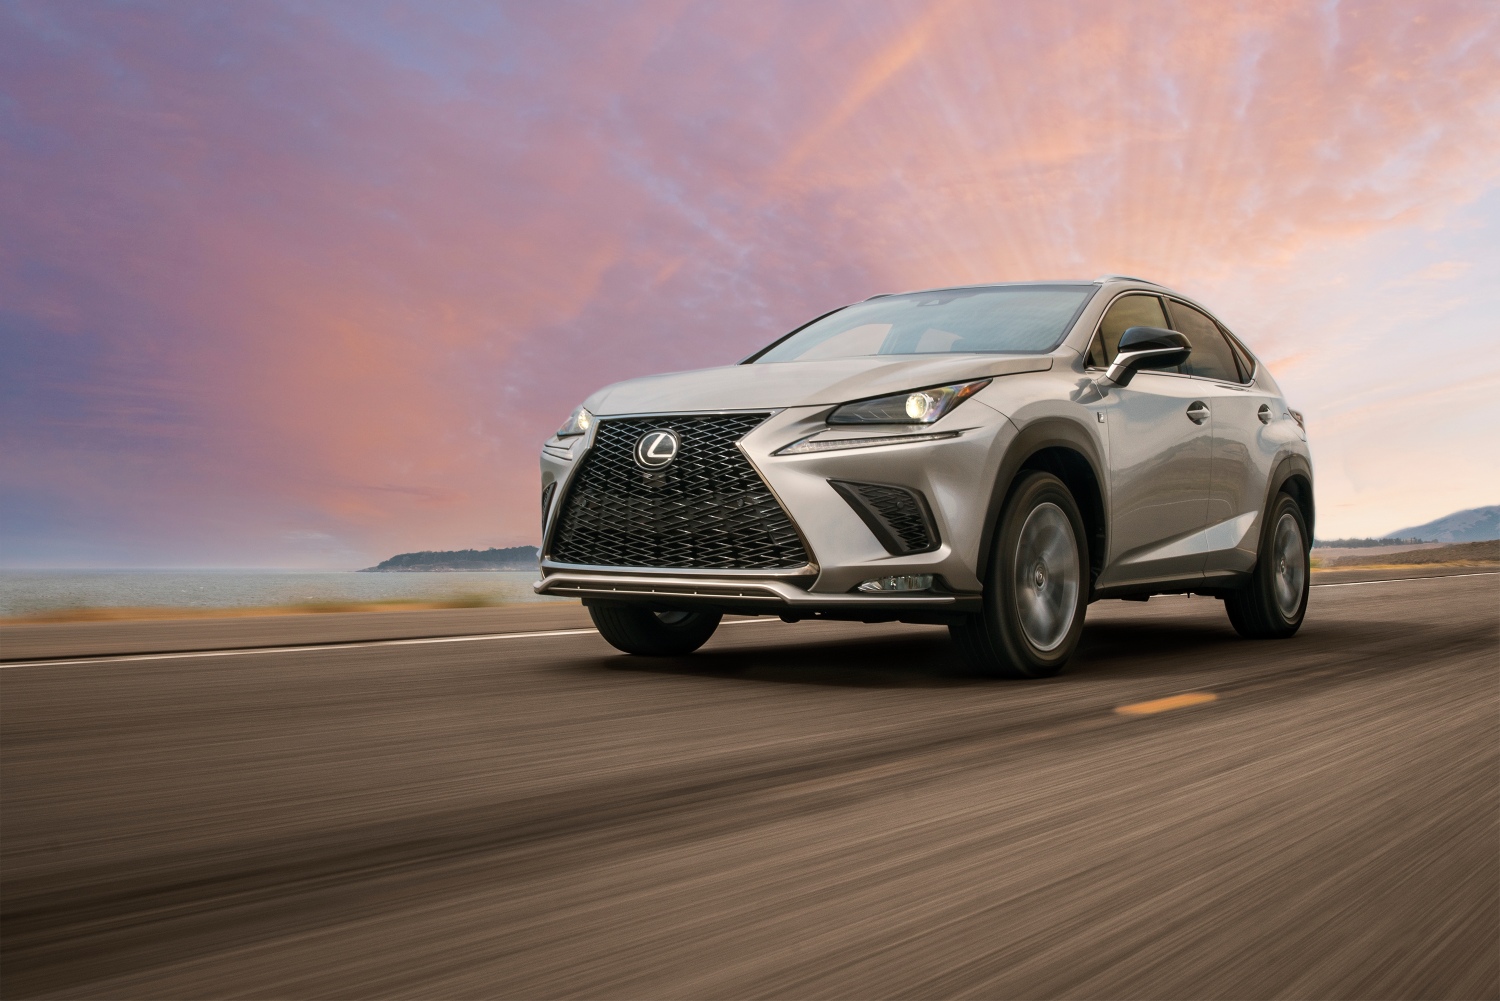 Most affordable luxury SUVs include the Lexus NX 300